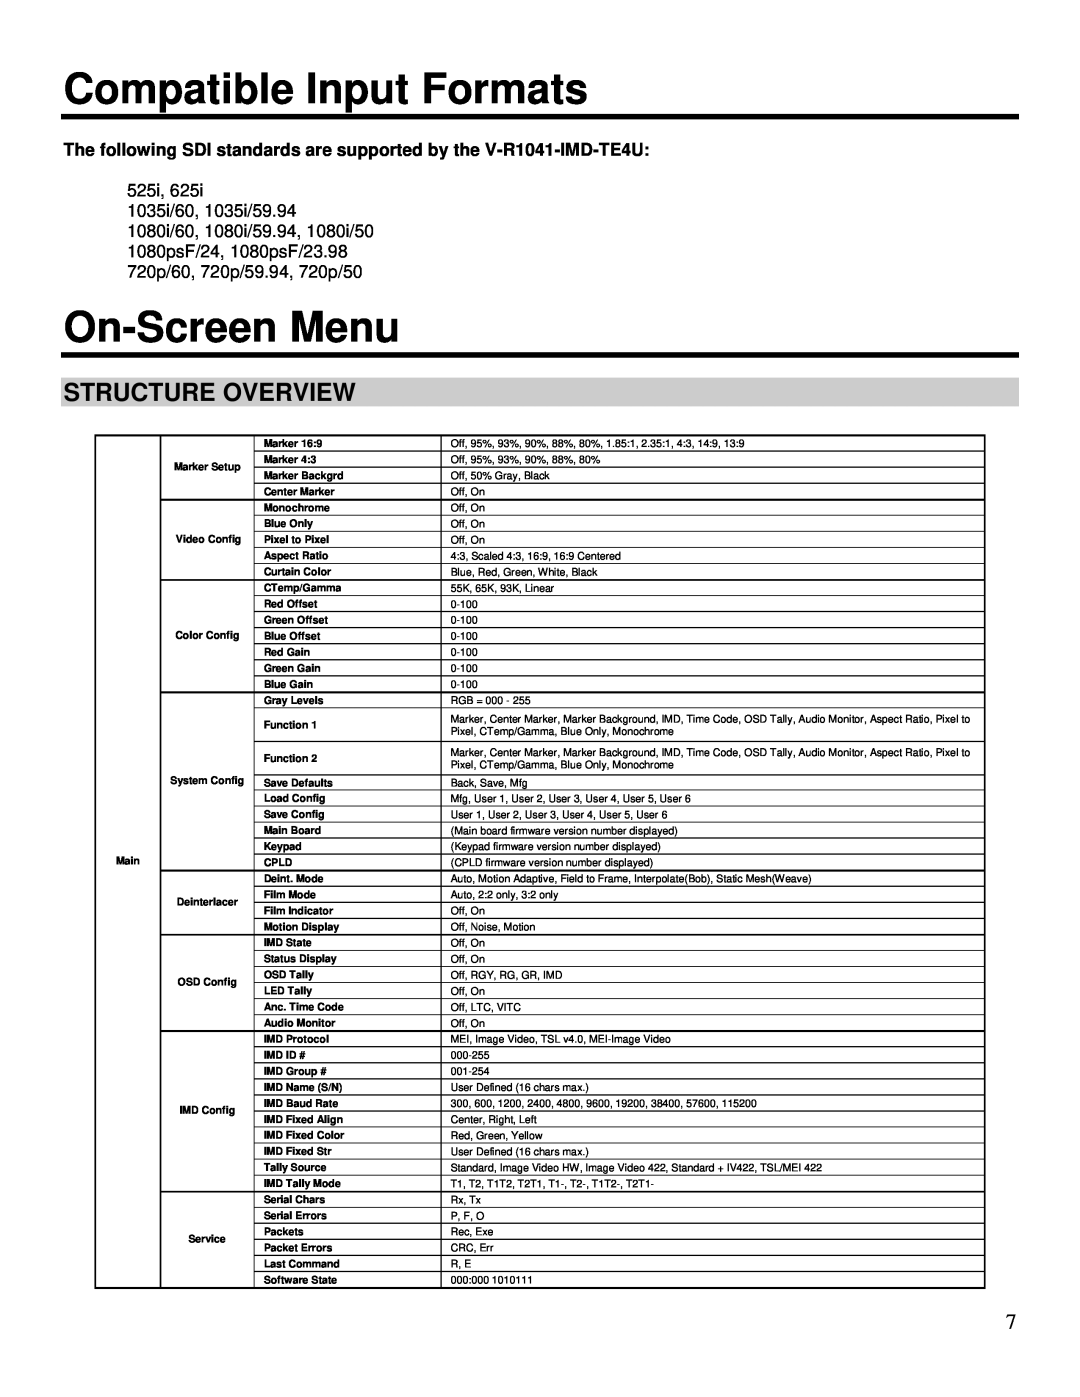 Marshall electronic V-R1041-IMD-TE4U operating instructions Compatible Input Formats, On-Screen Menu, Structure Overview 